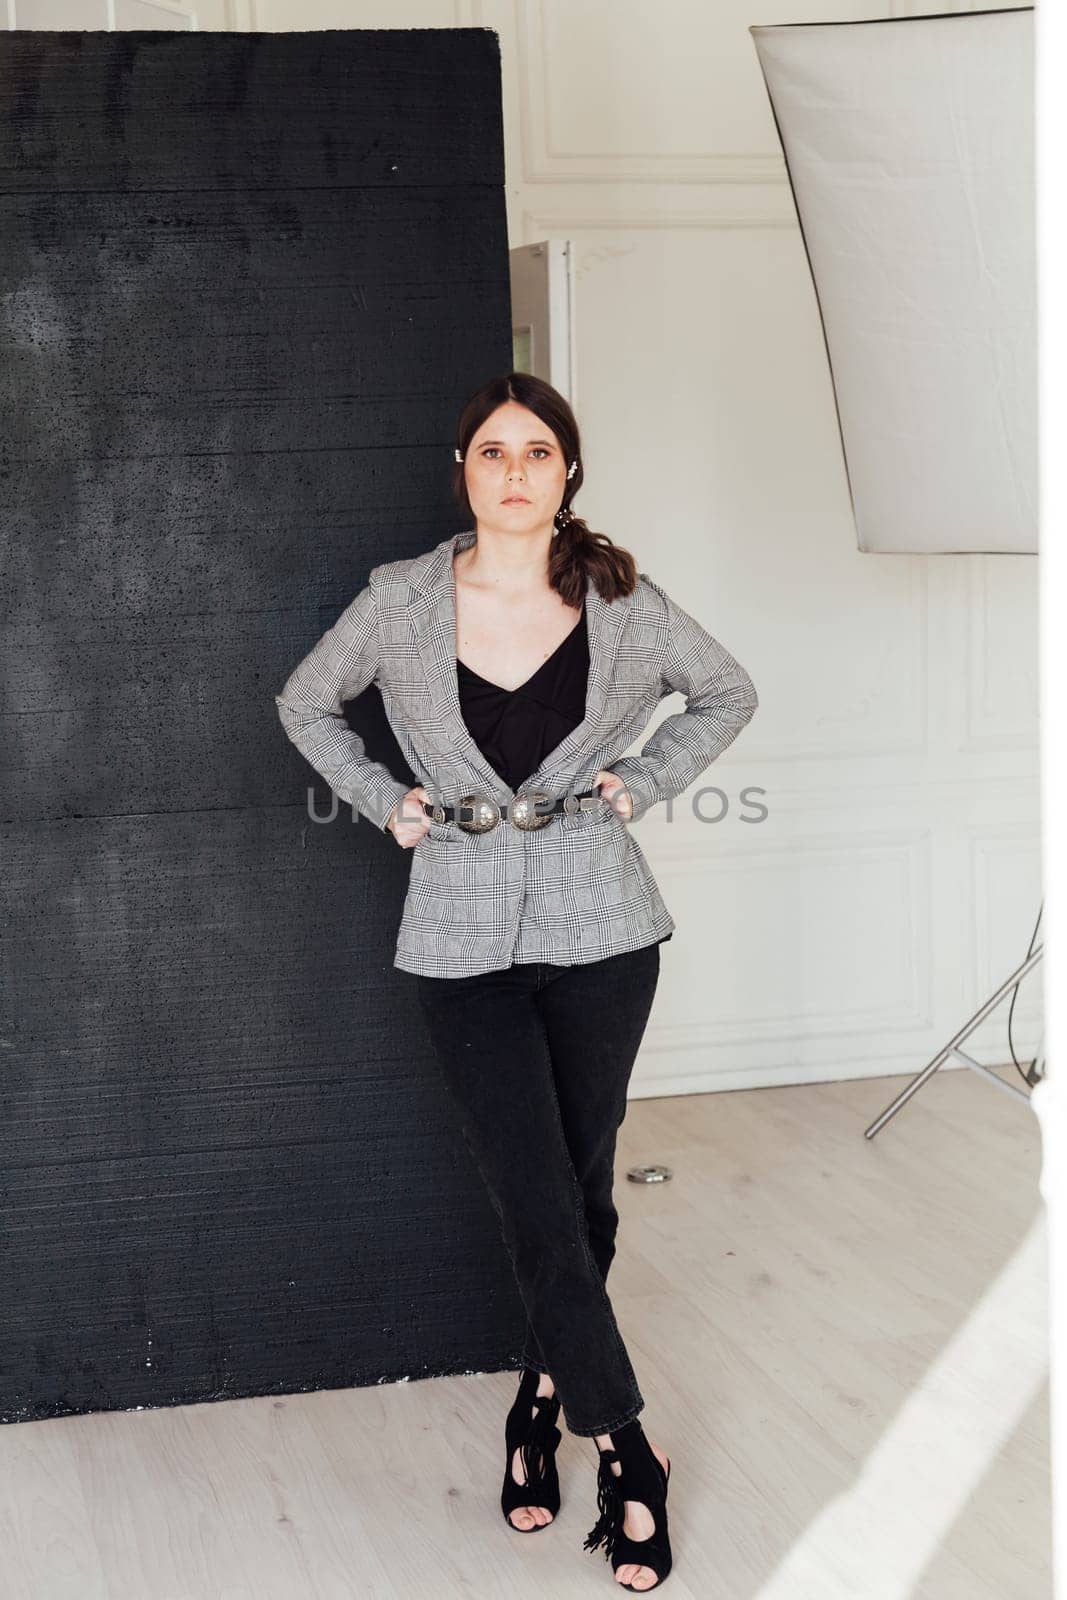 fashionable business woman in a jacket on a black and white background by Simakov